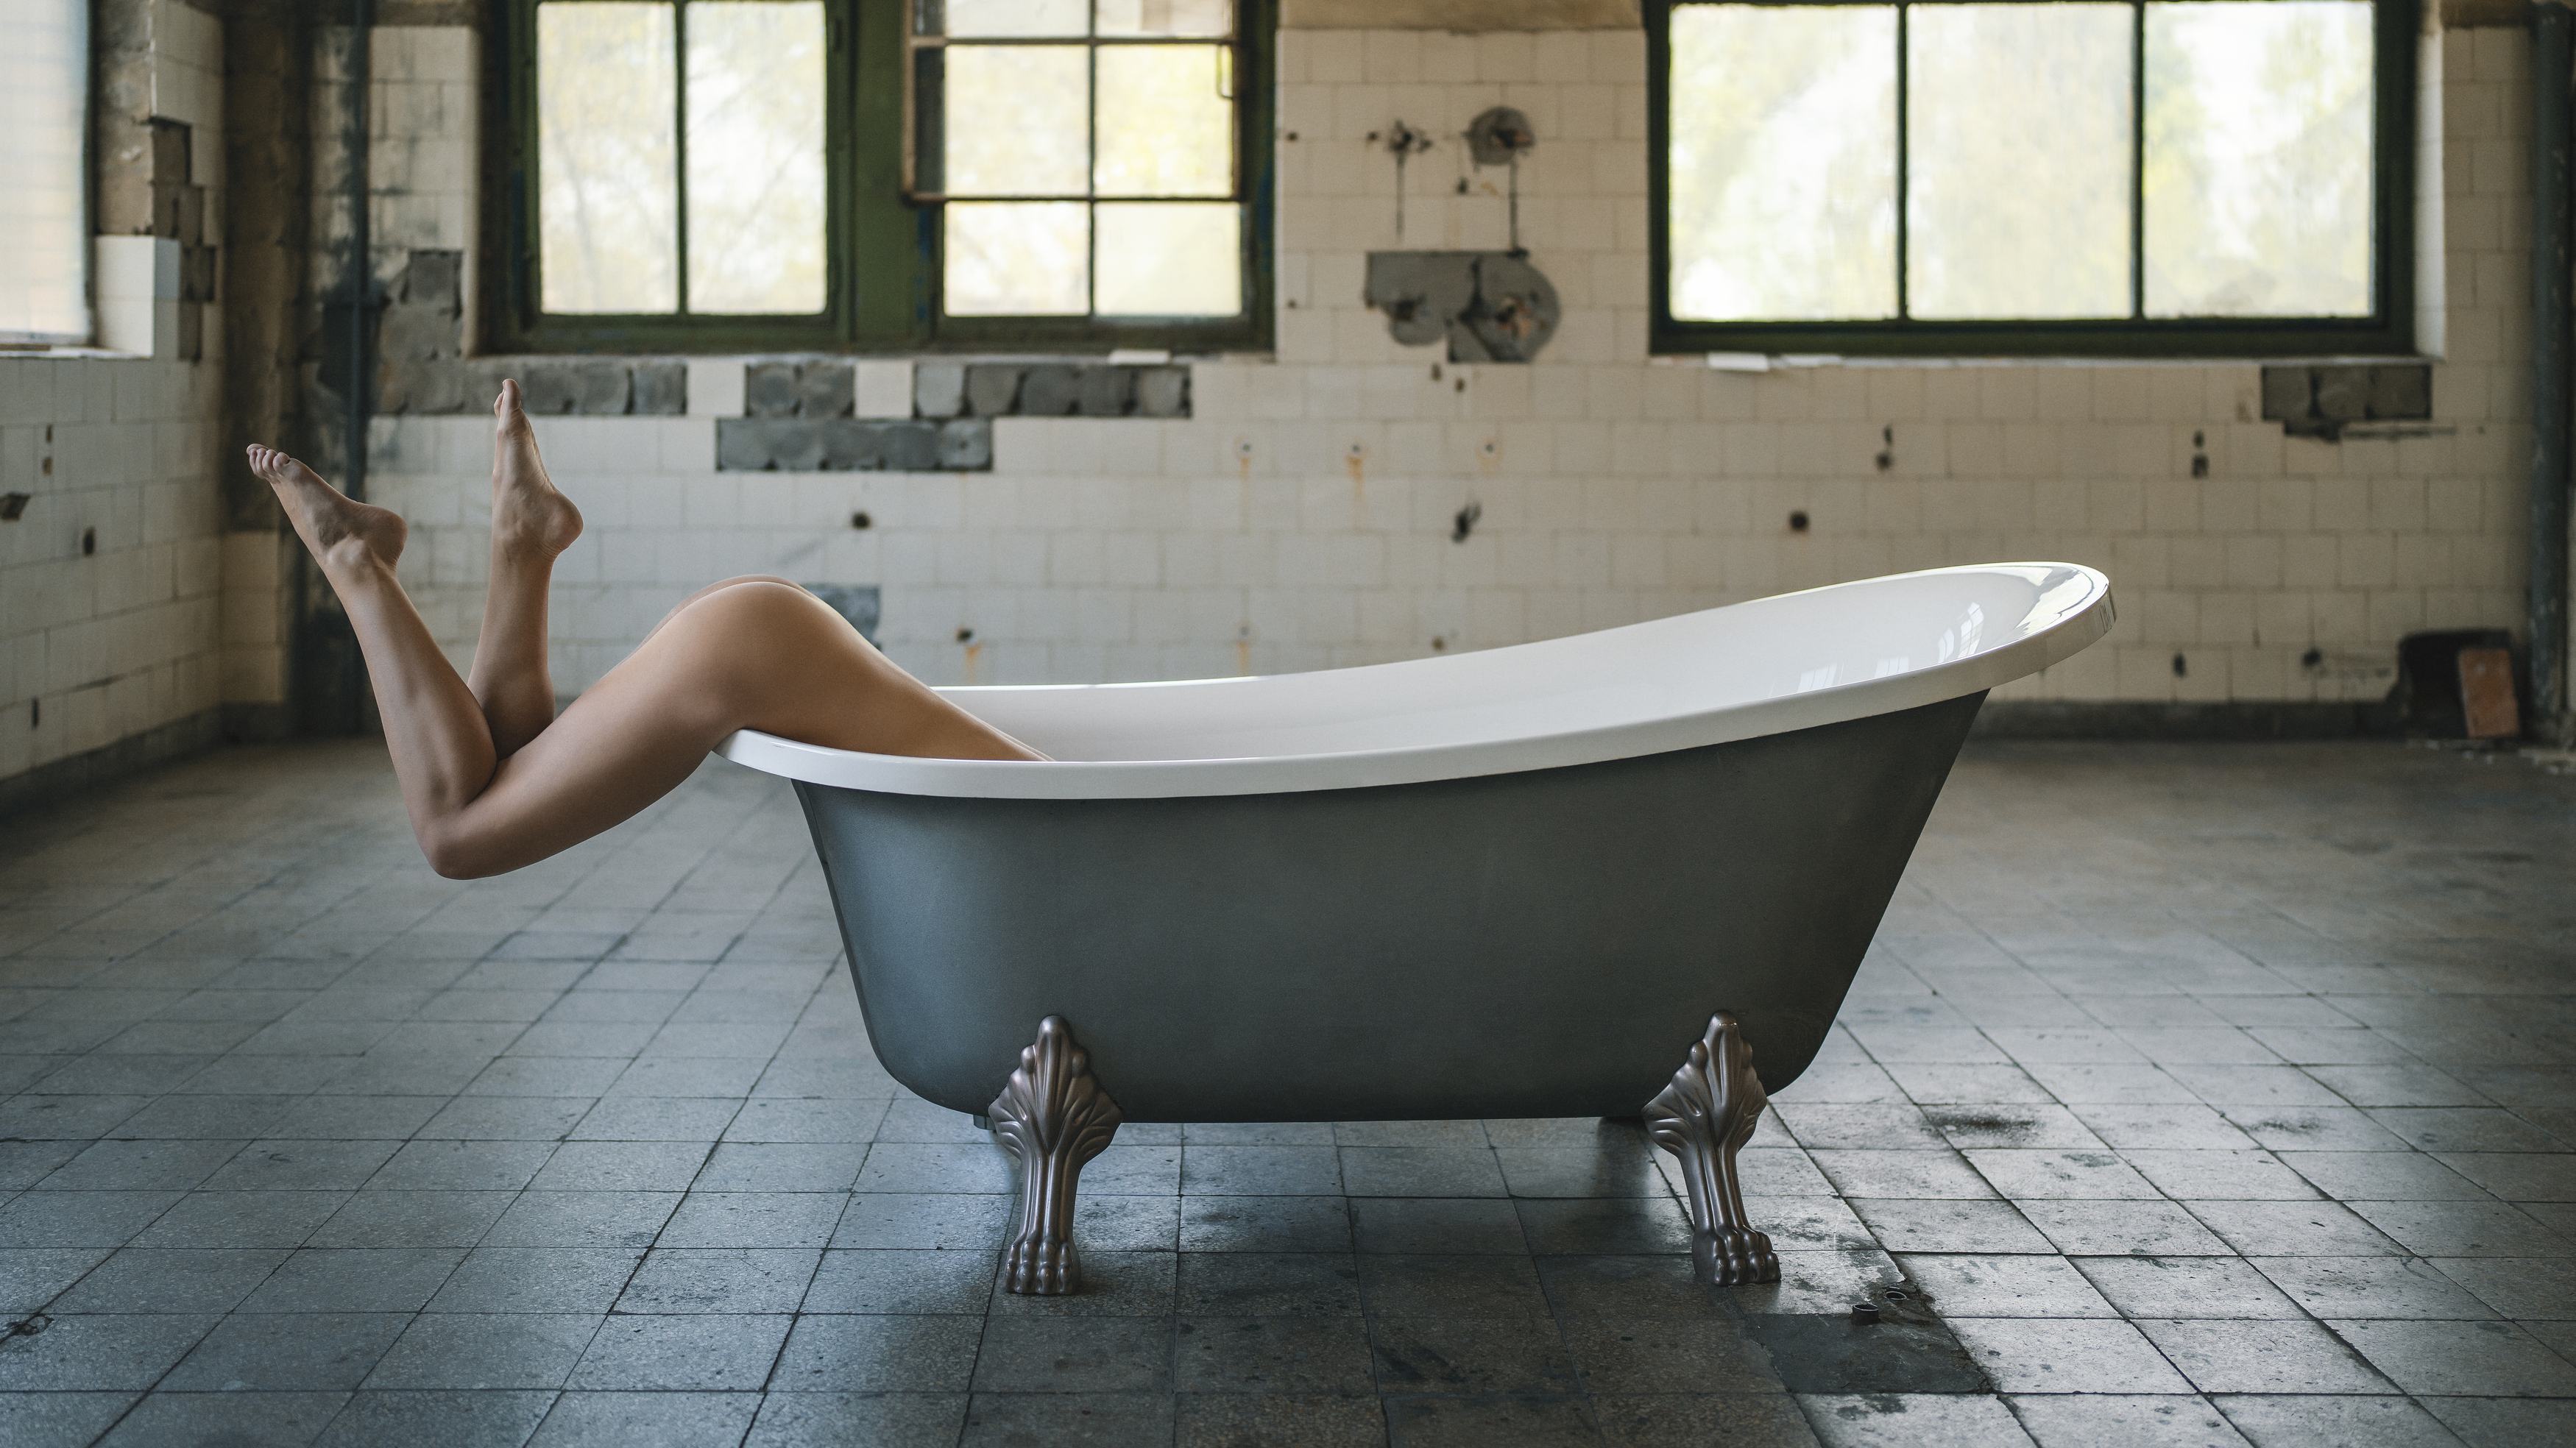 abandoned building, attractive, bath, creative, fantasy, female, grace, individuality, indoors, lifestyles, nude, one person, pose, scene, sensuality, side view, studio shot, windows, young woman, Alex Tsarfin